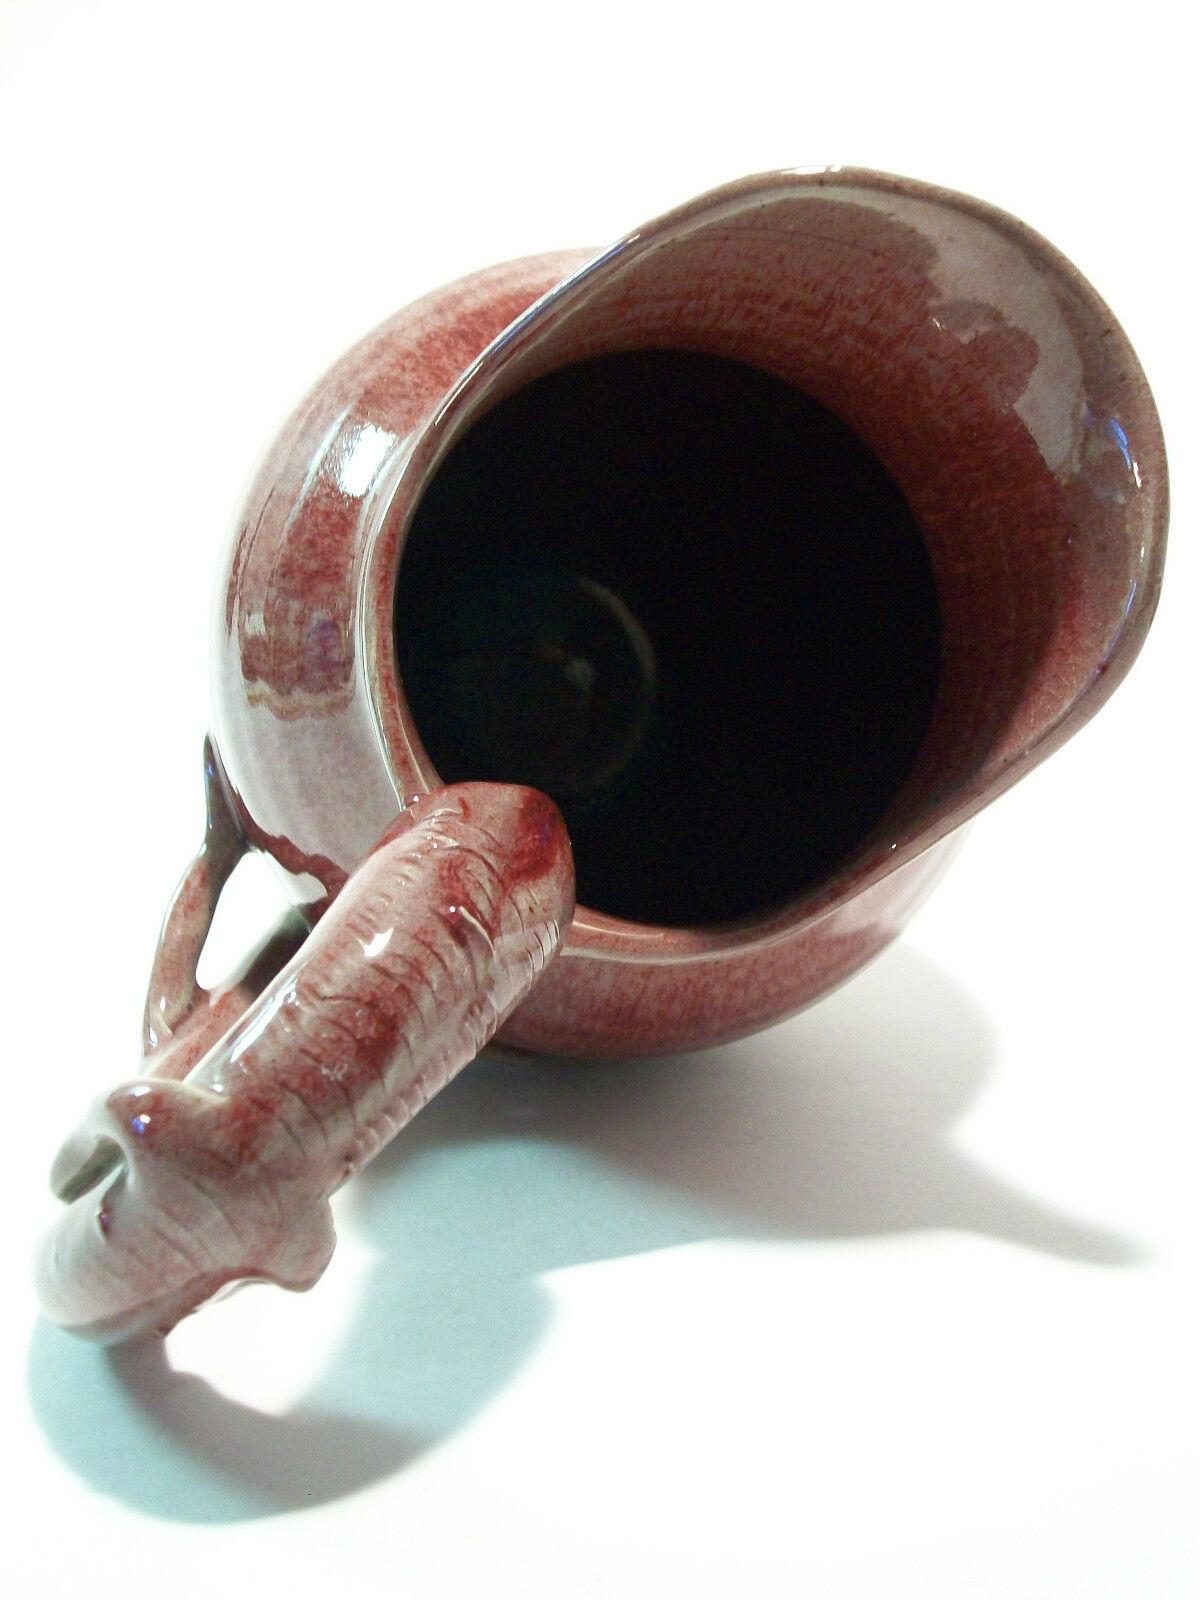 Ceramic Vintage Serpent Handled Studio Pottery Pitcher, Signed, Mid 20th Century For Sale